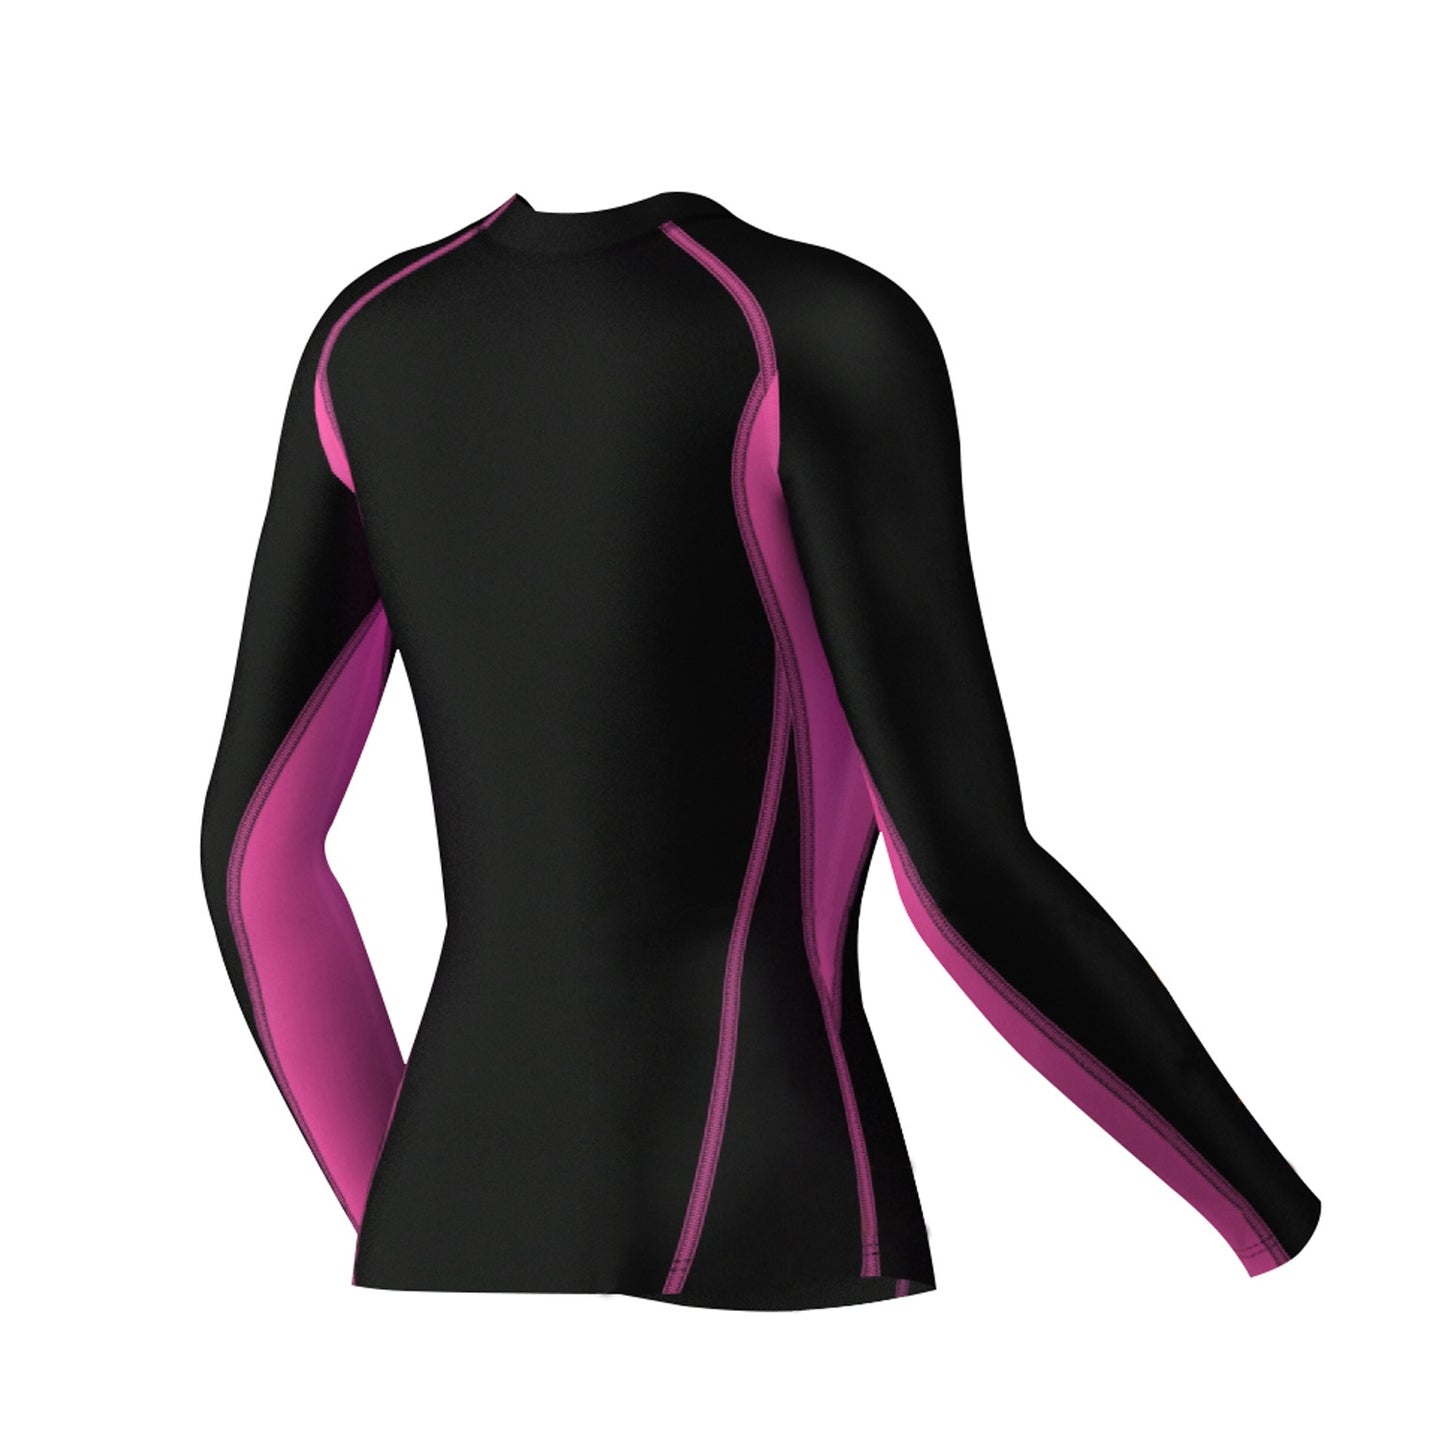 ROXX Womens Running Top Collection - Quick Dry Full Sleeve Gym Dry Sweat Wicking Sports